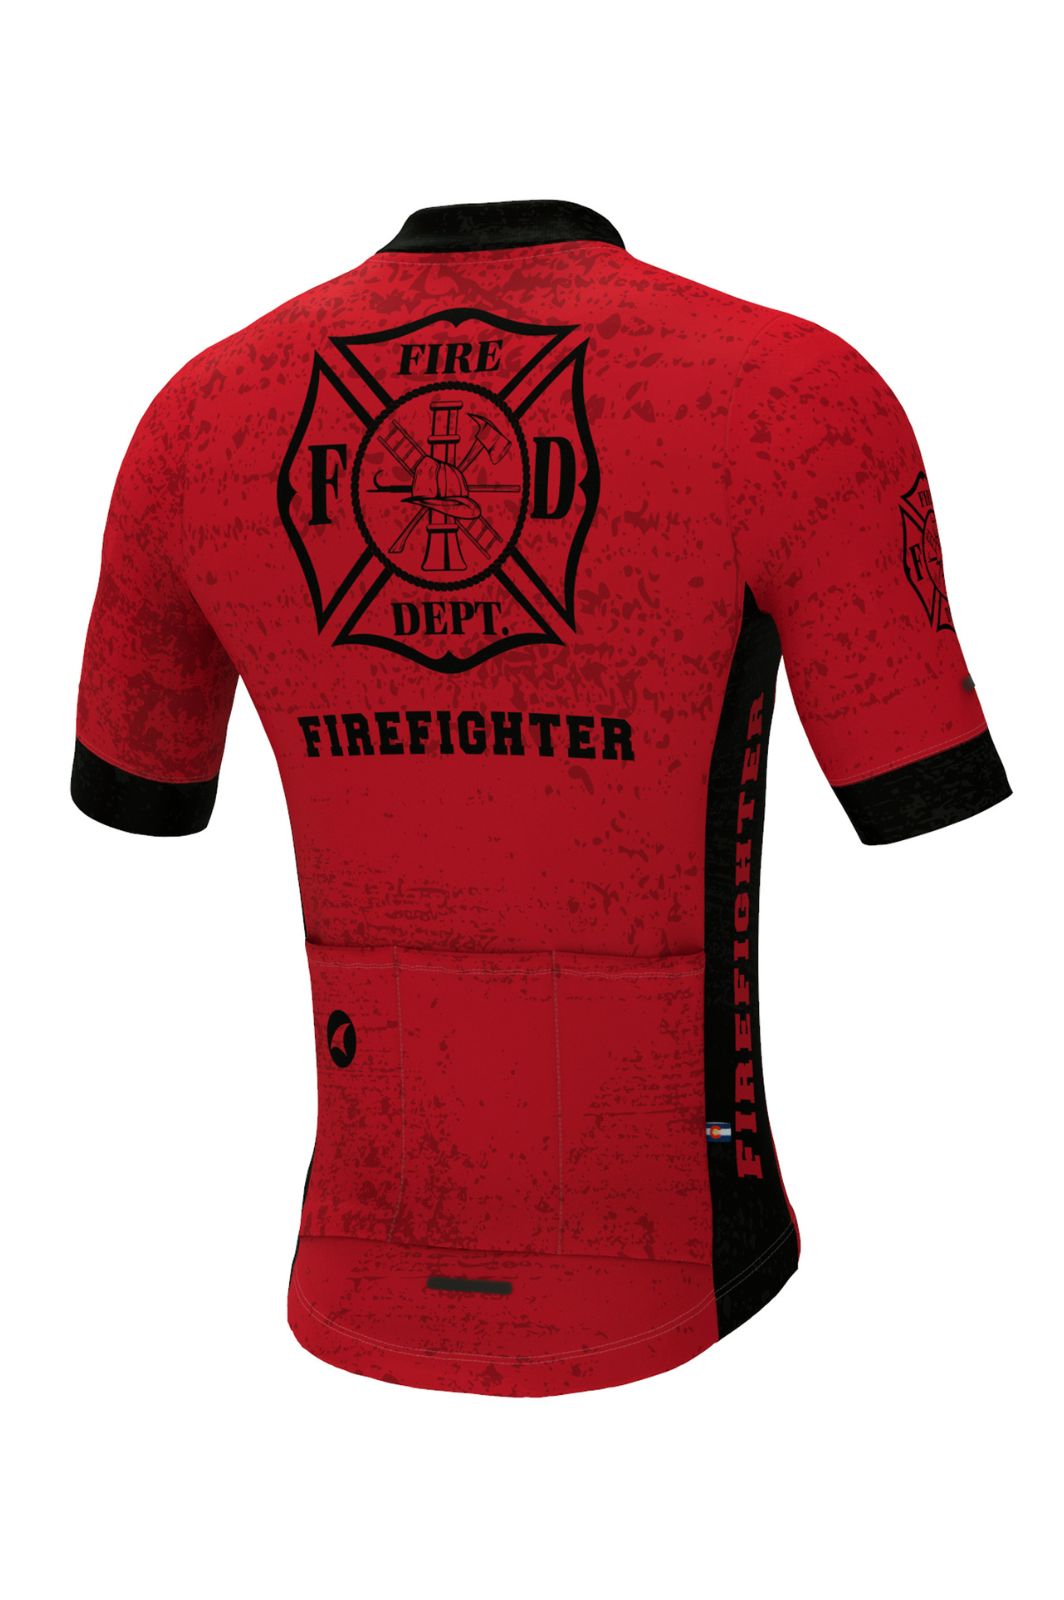 Men's First Responder Firefighter Cycling Jersey - Ascent Aero Back View